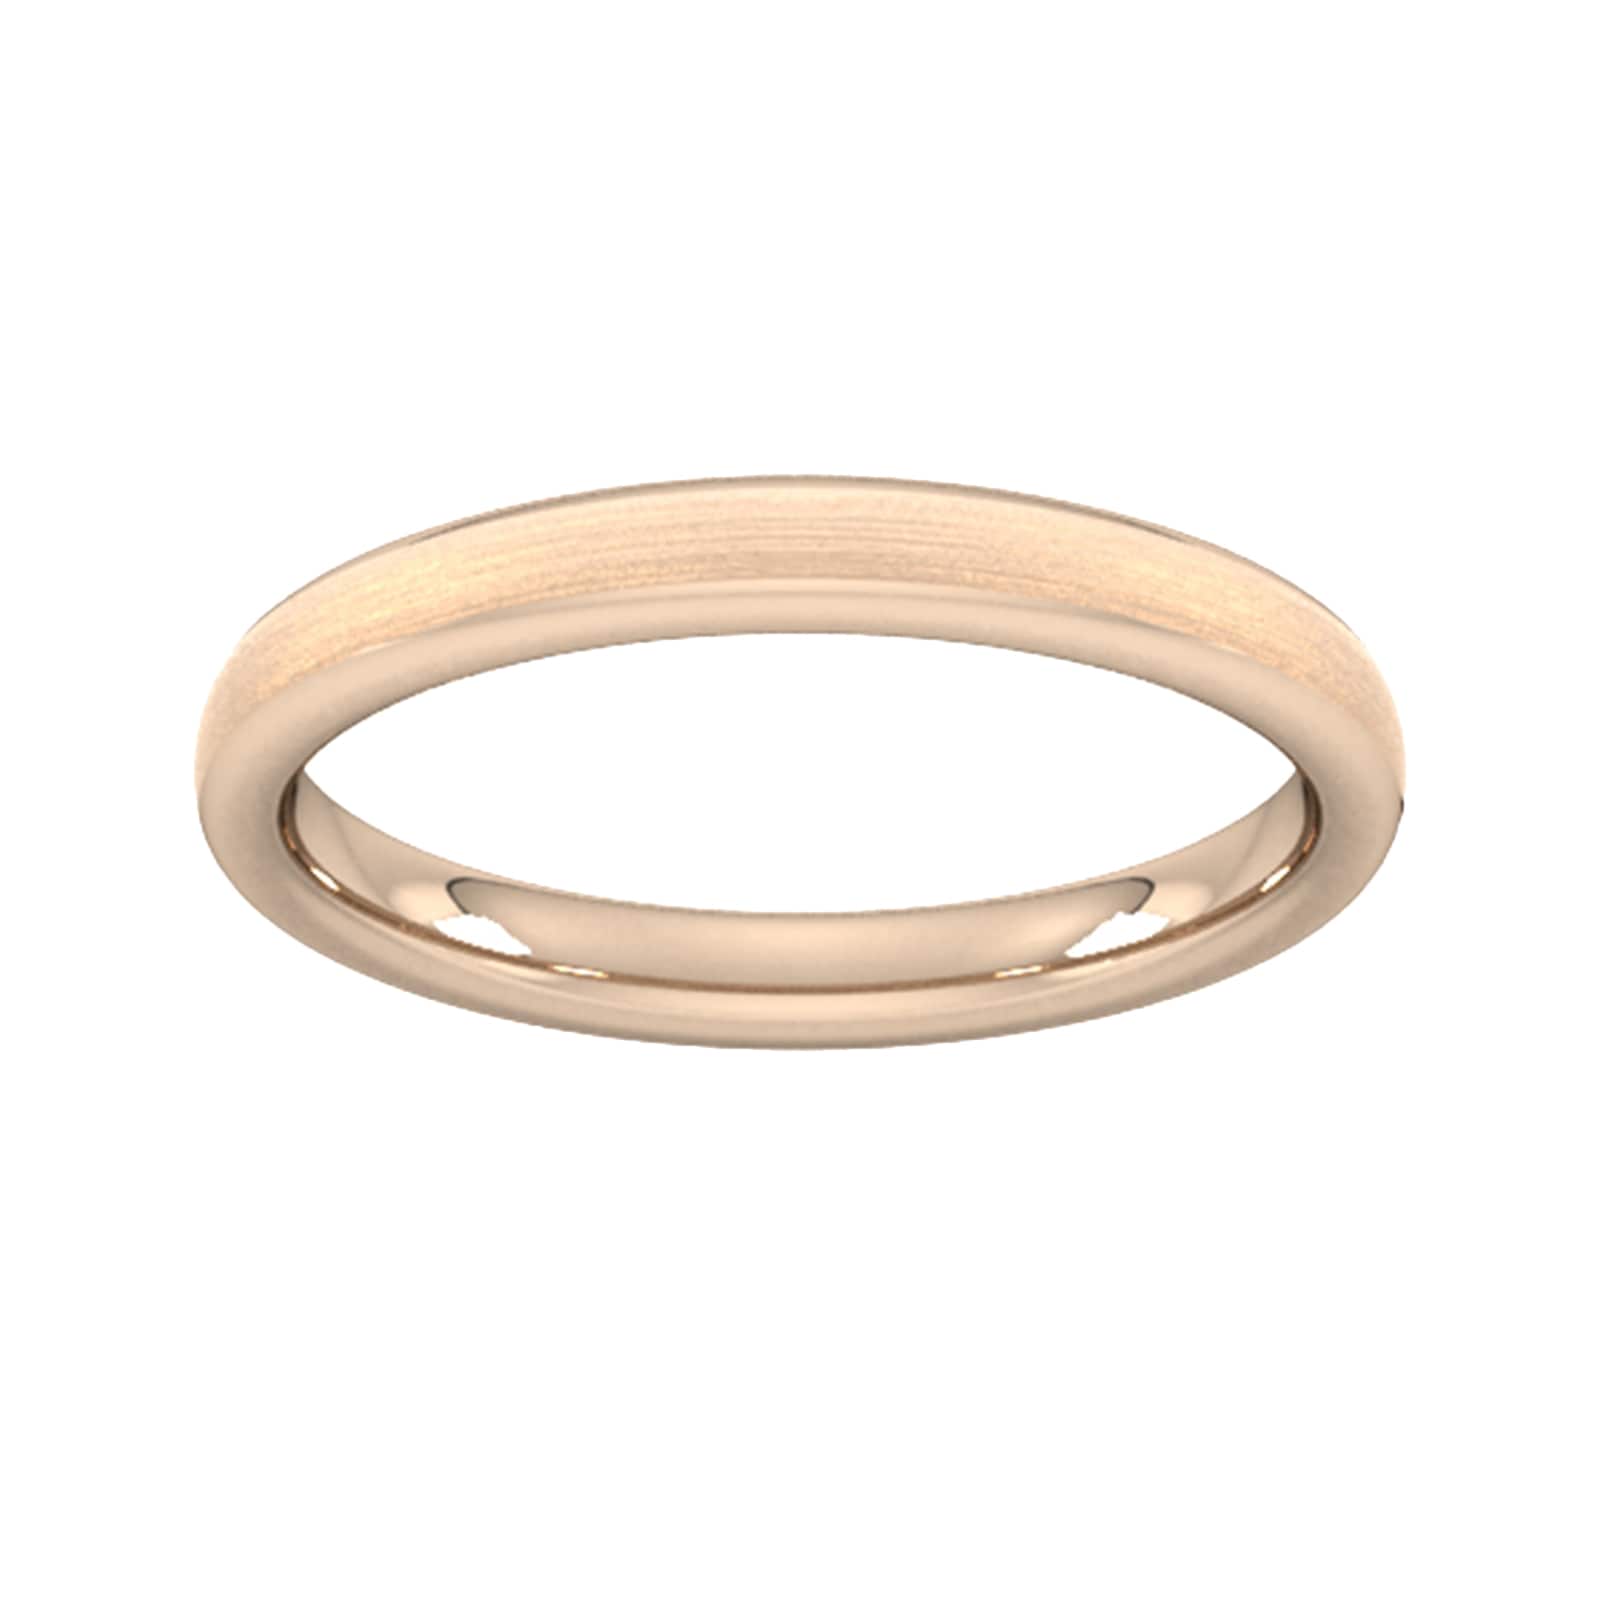 2.5mm Traditional Court Heavy Matt Finished Wedding Ring In 18 Carat Rose Gold - Ring Size K